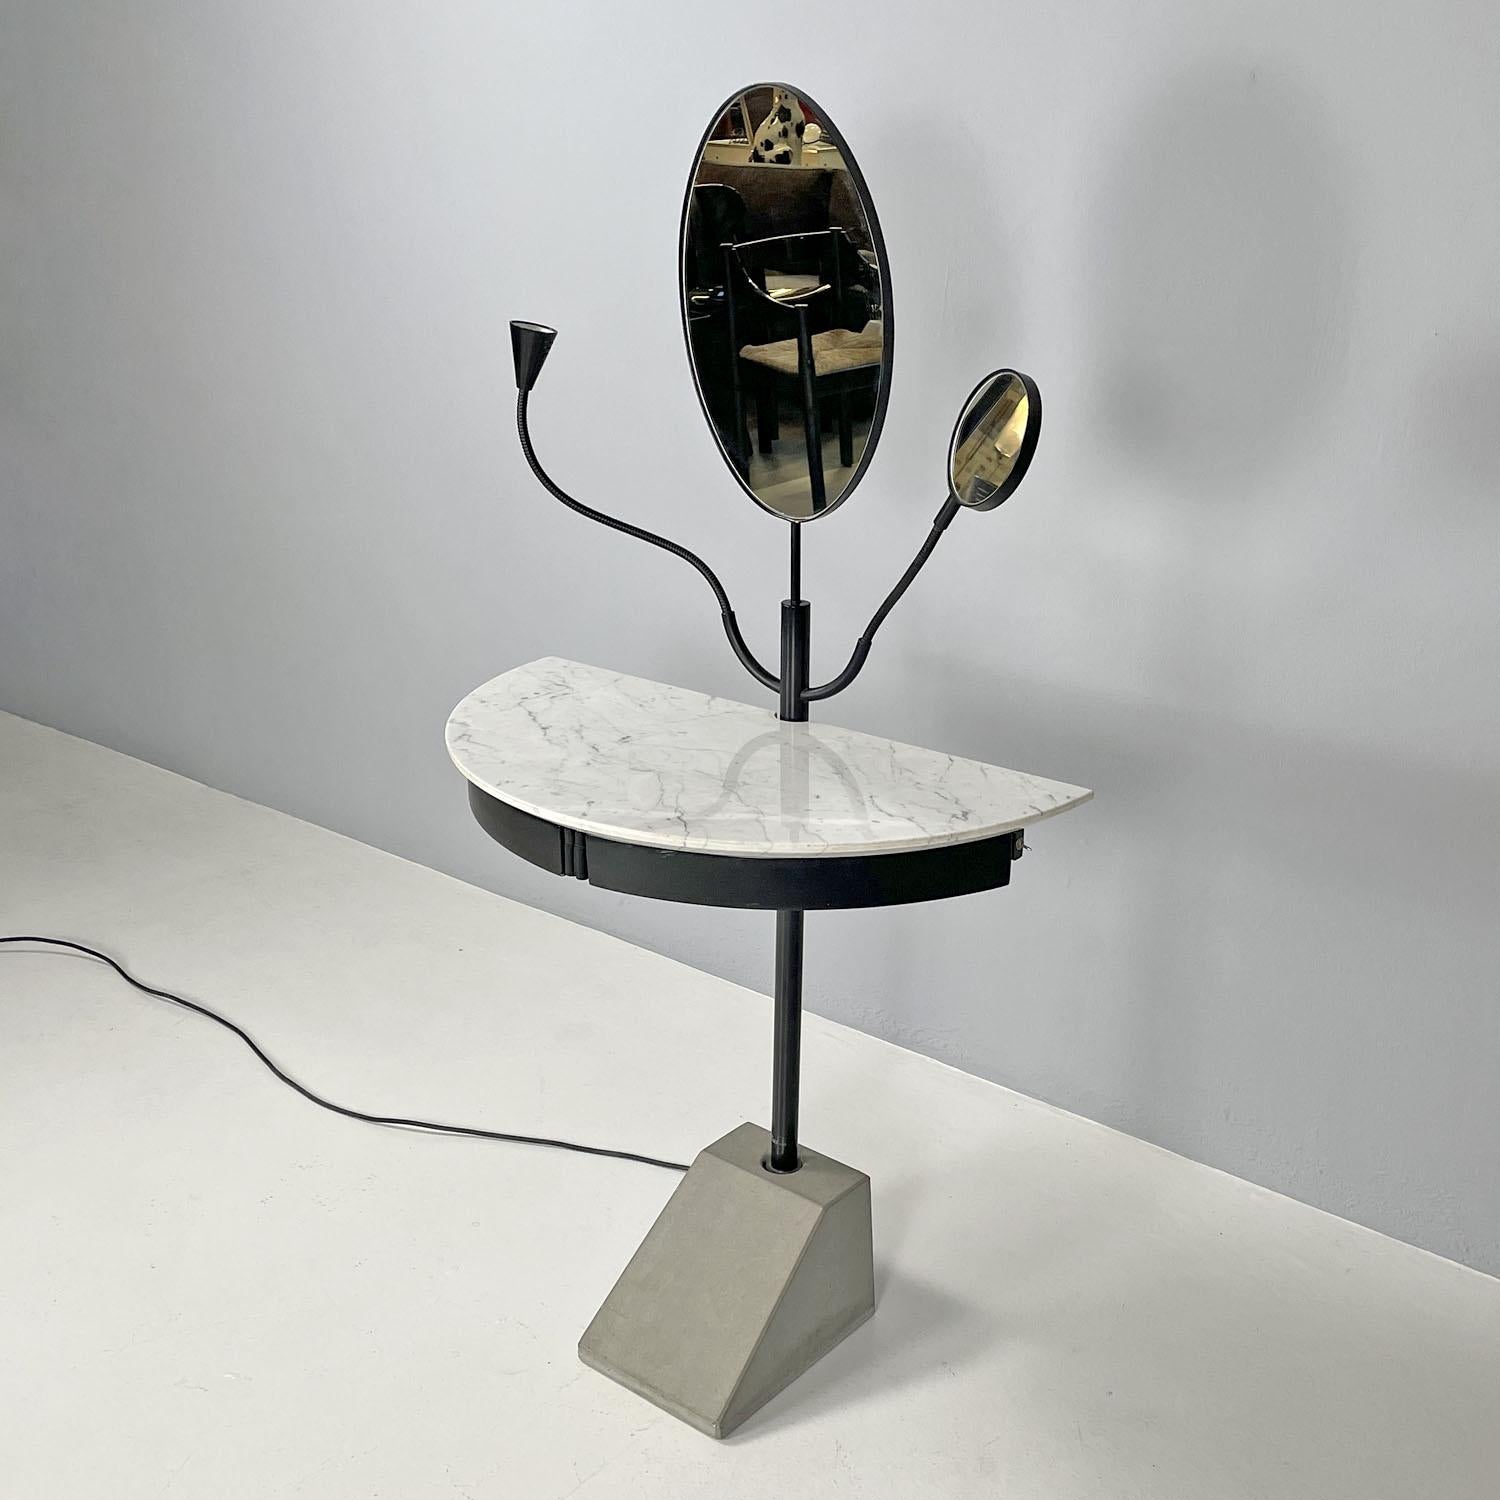 Italian modern metal and marble dressing table Carlo Forcolini for Alias, 1980s 
Console with mirror with semicircular marble top. The main structure is in black painted metal. It has a larger central oval-shaped mirror that rotates on itself, with